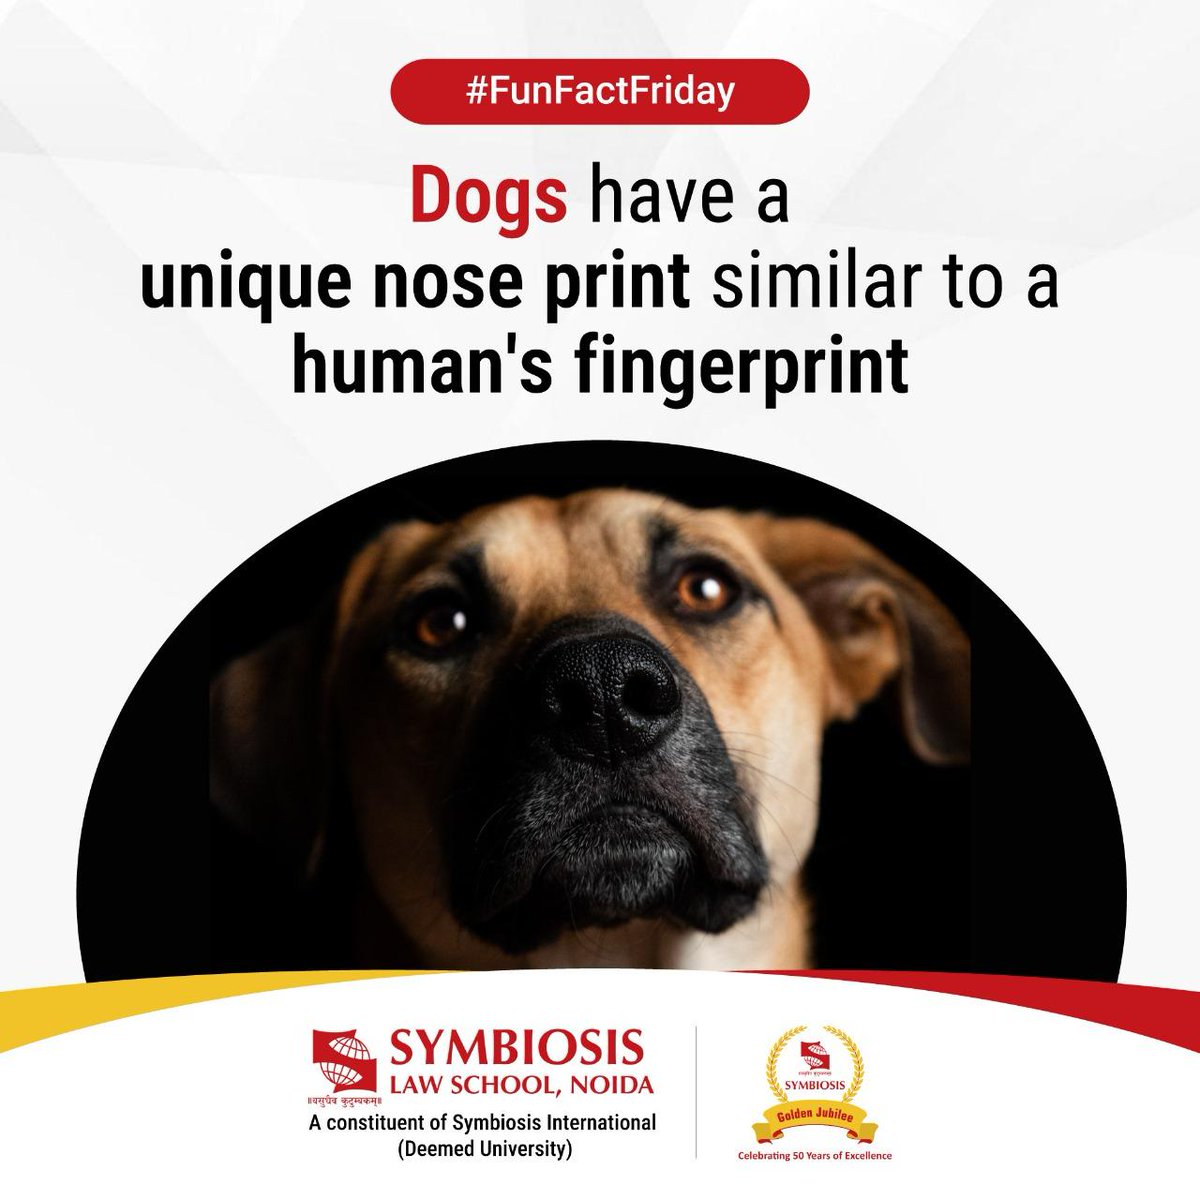 Did you know that dogs don't have #fingerprints, but they do have something equally unique? Just like our fingerprints, every dog's nose print carries a distinctive pattern of dimples, dots and ridges, combined with the shape of their nostril openings. #SLS #funfactfriday